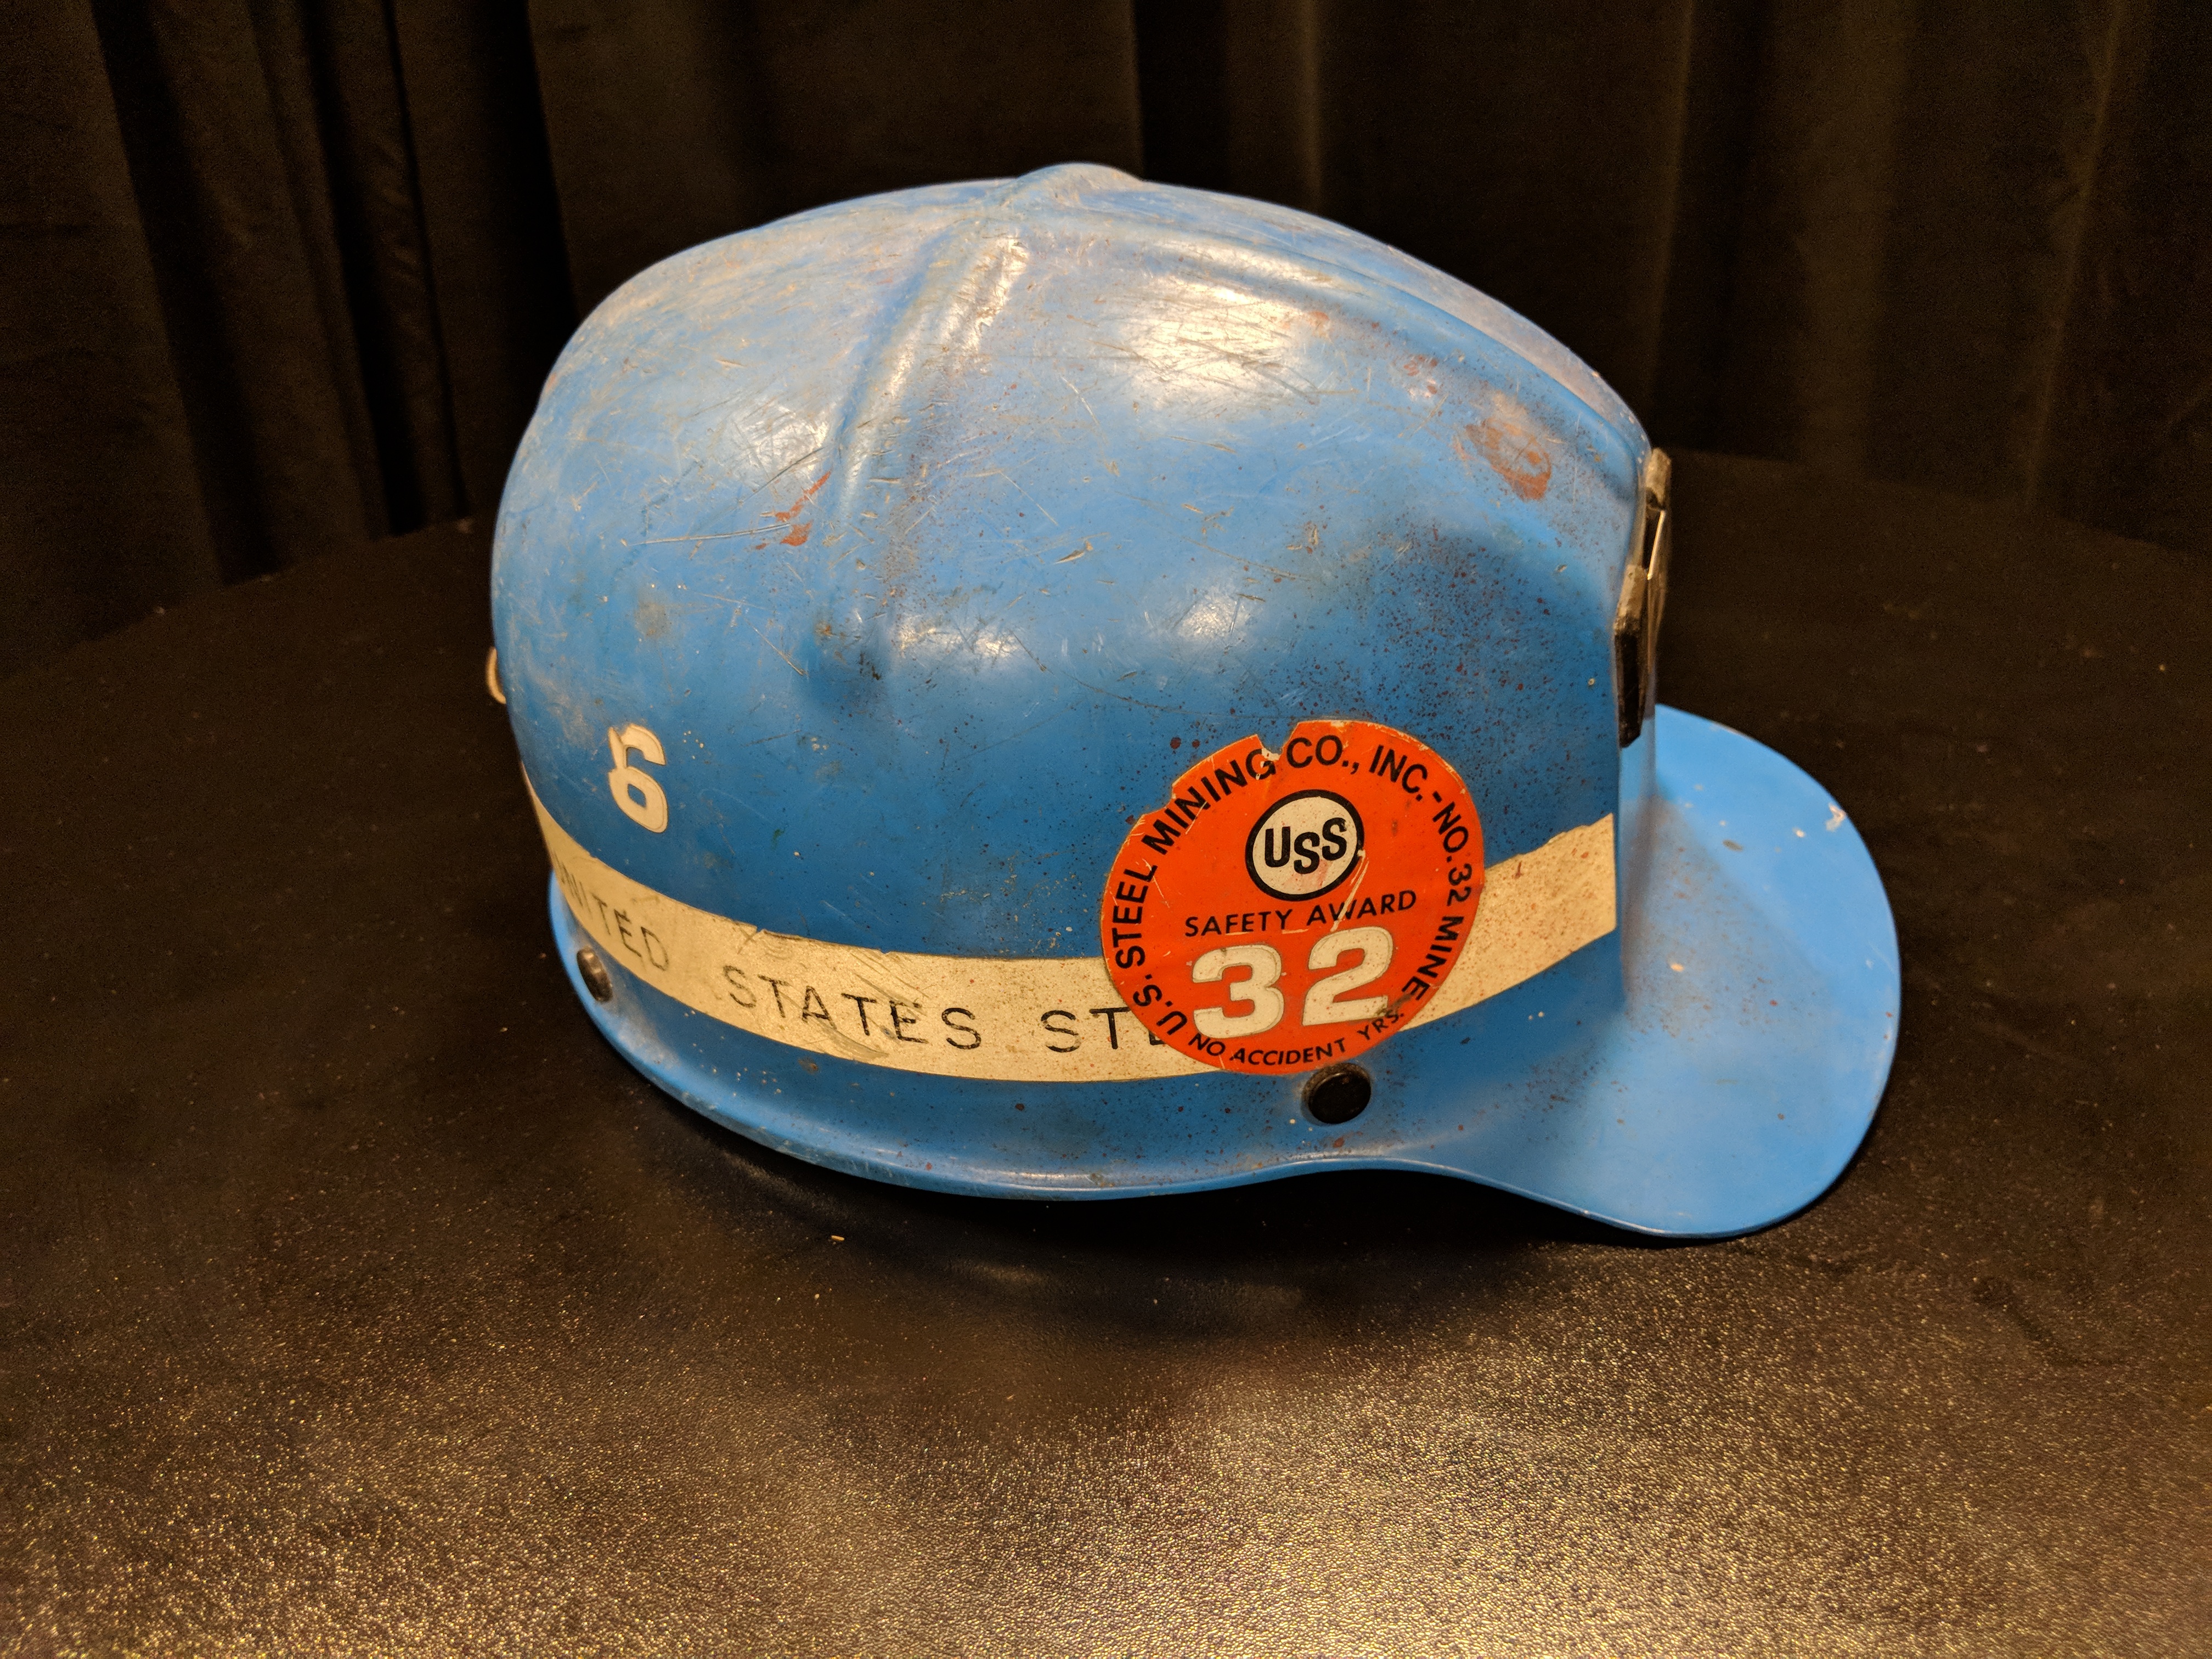 Miner's hard hat from St. Louis exhibit